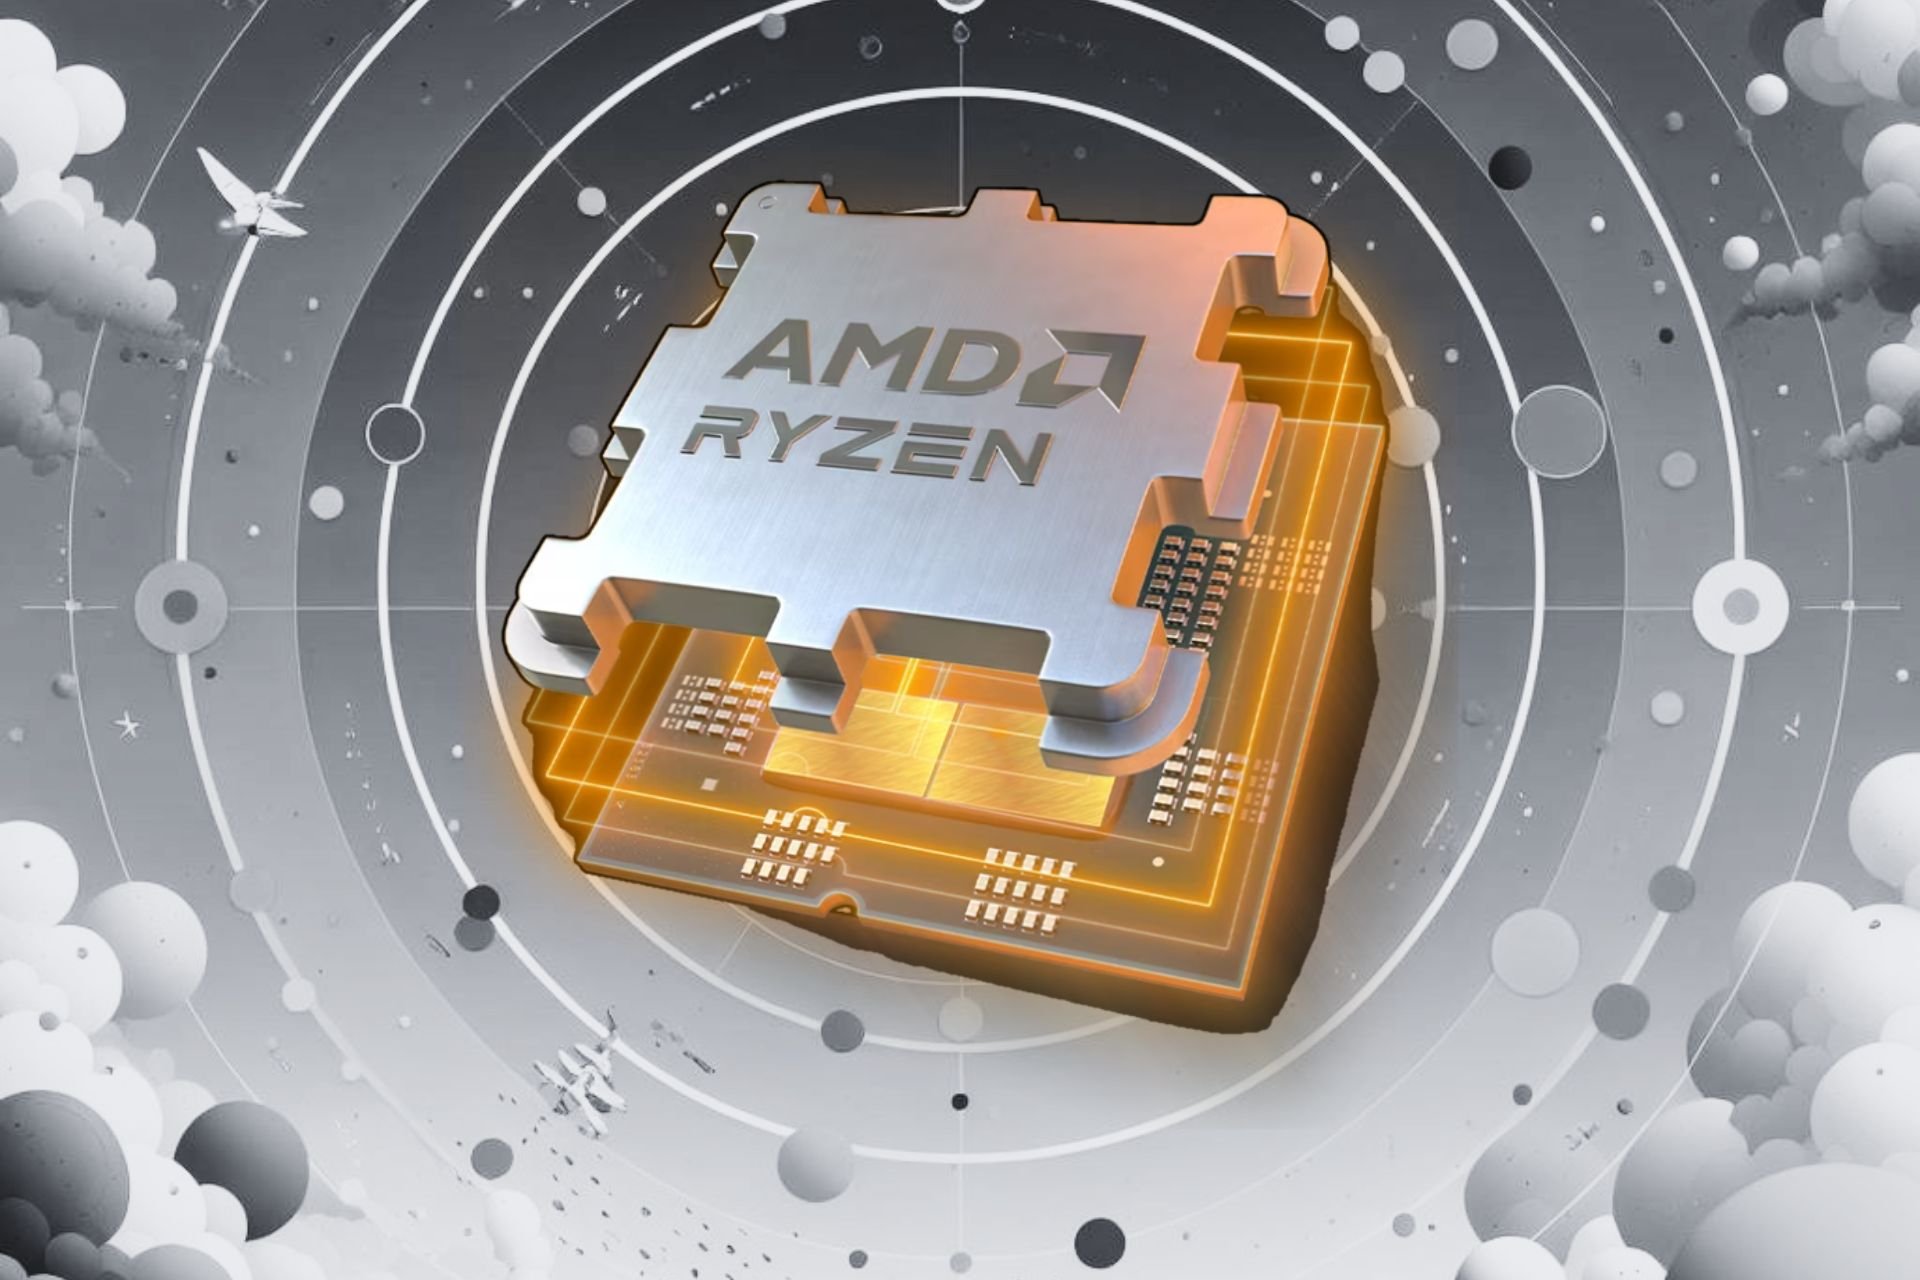 AMD Zen 5 featured on a gray background